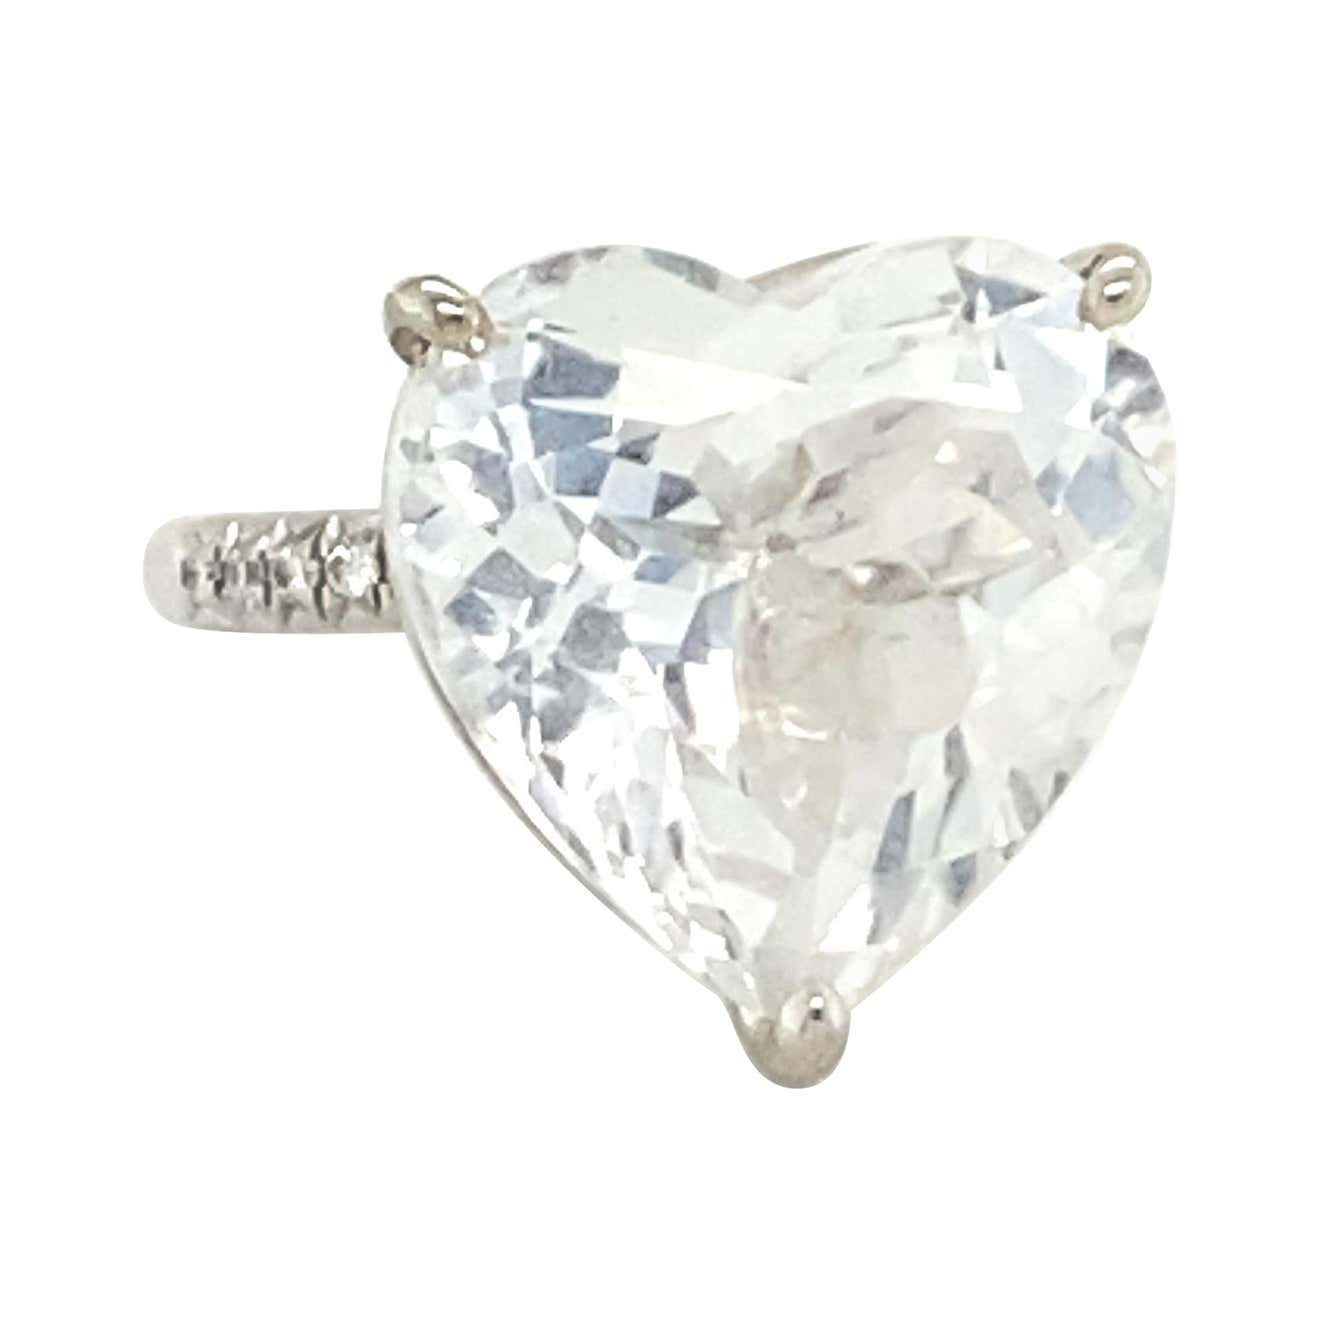 16.34 Carat Heart Shaped White Topaz Ring with .12 Carats of Diamonds